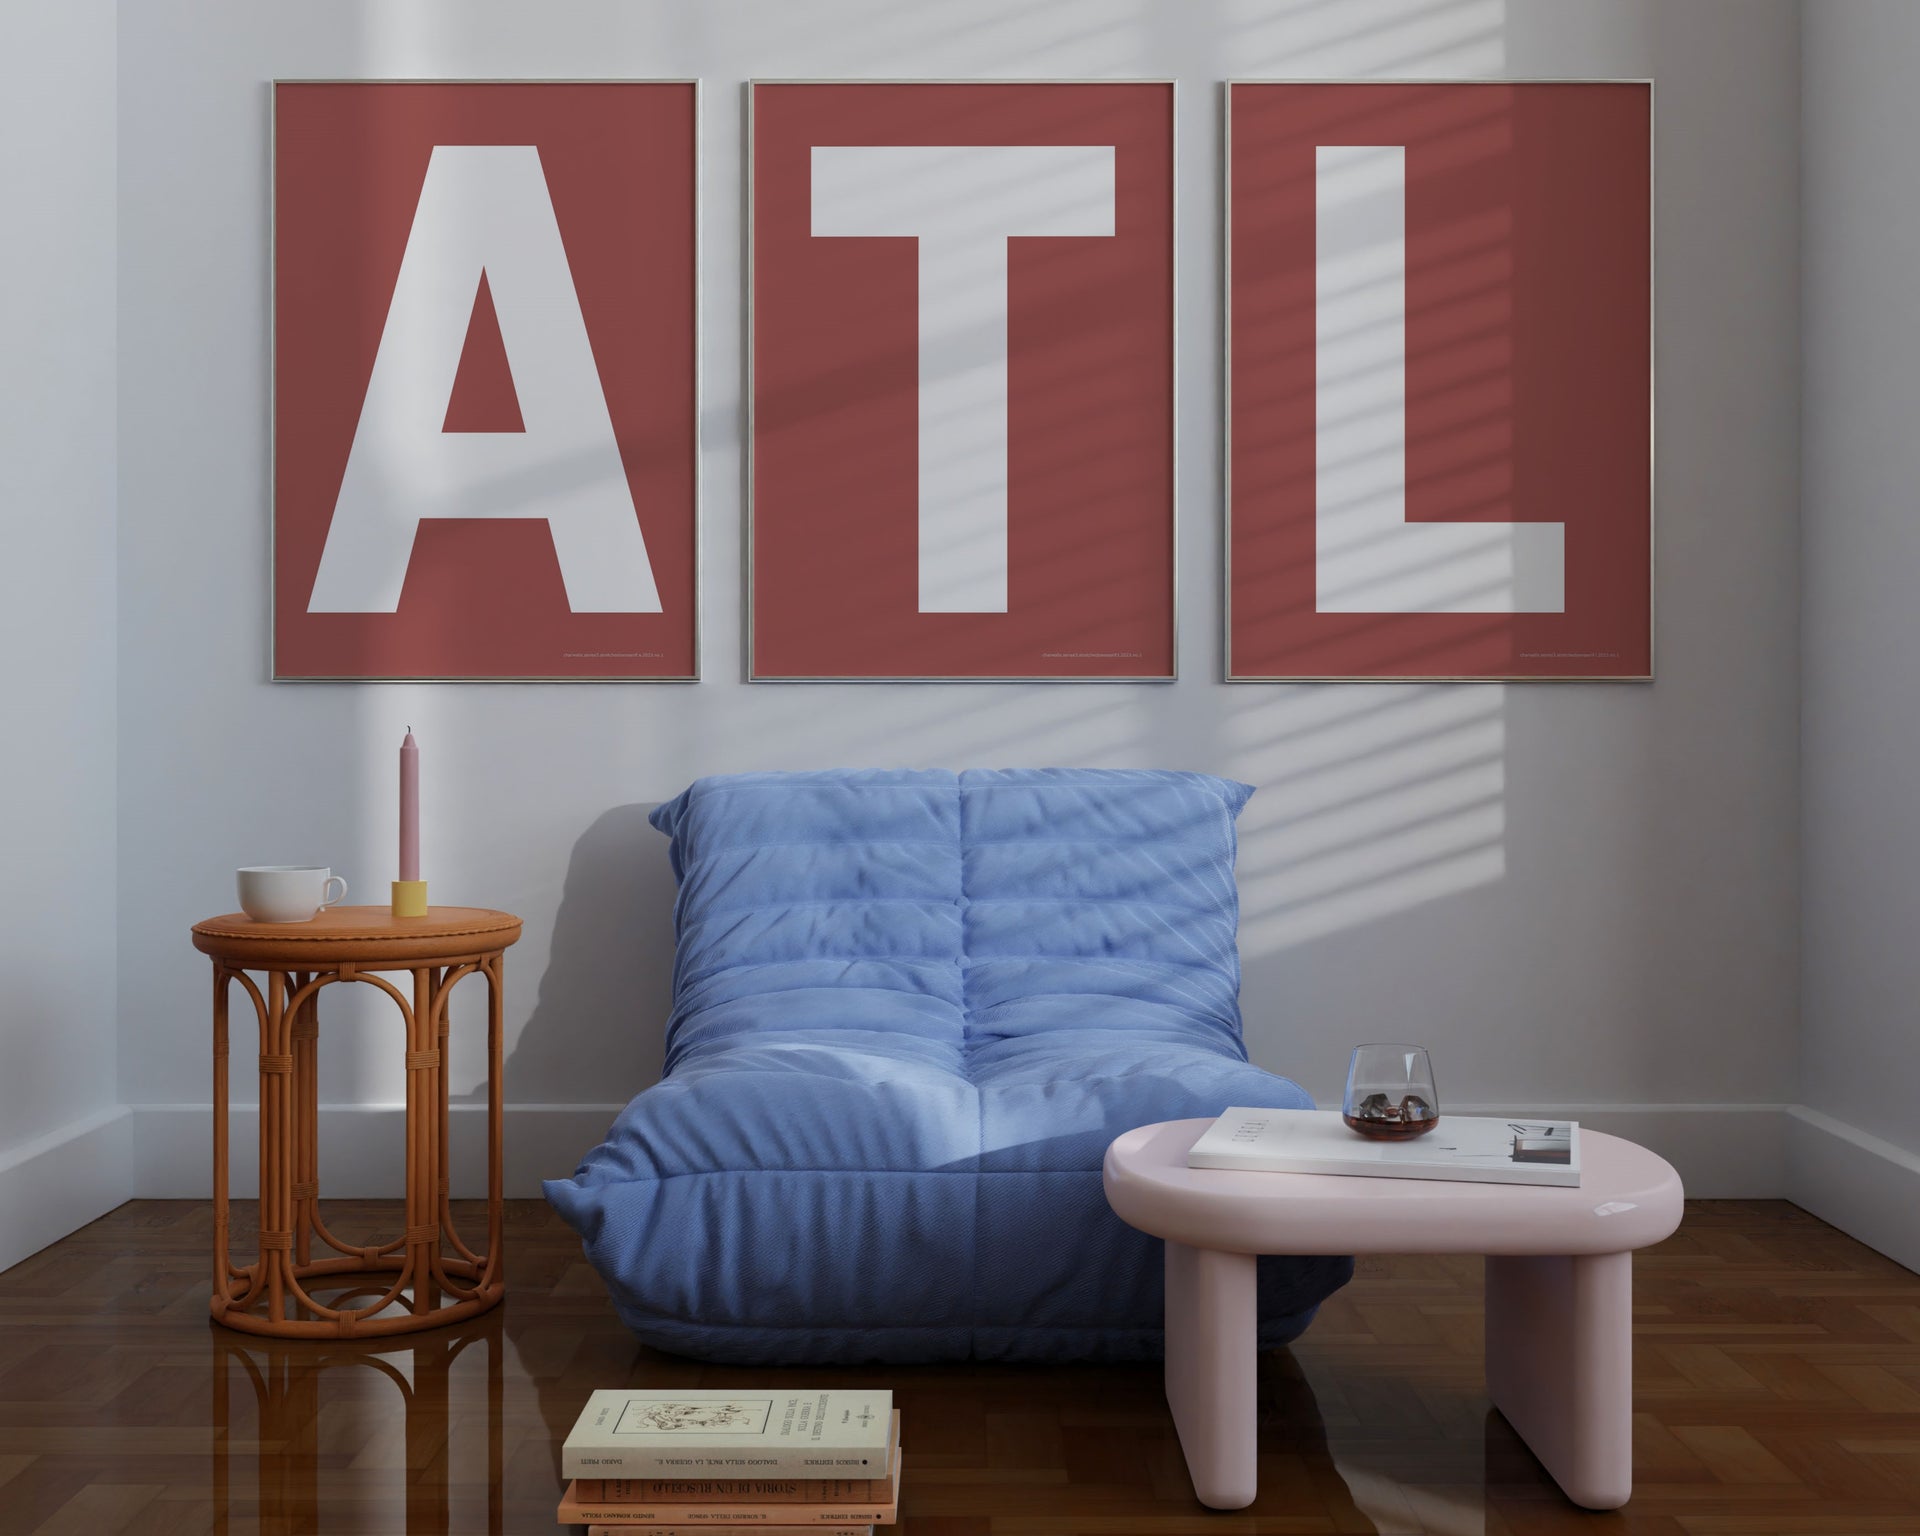 Three large framed Nantucked red and white letter art prints spelling out ATL hanging above a blue chair.